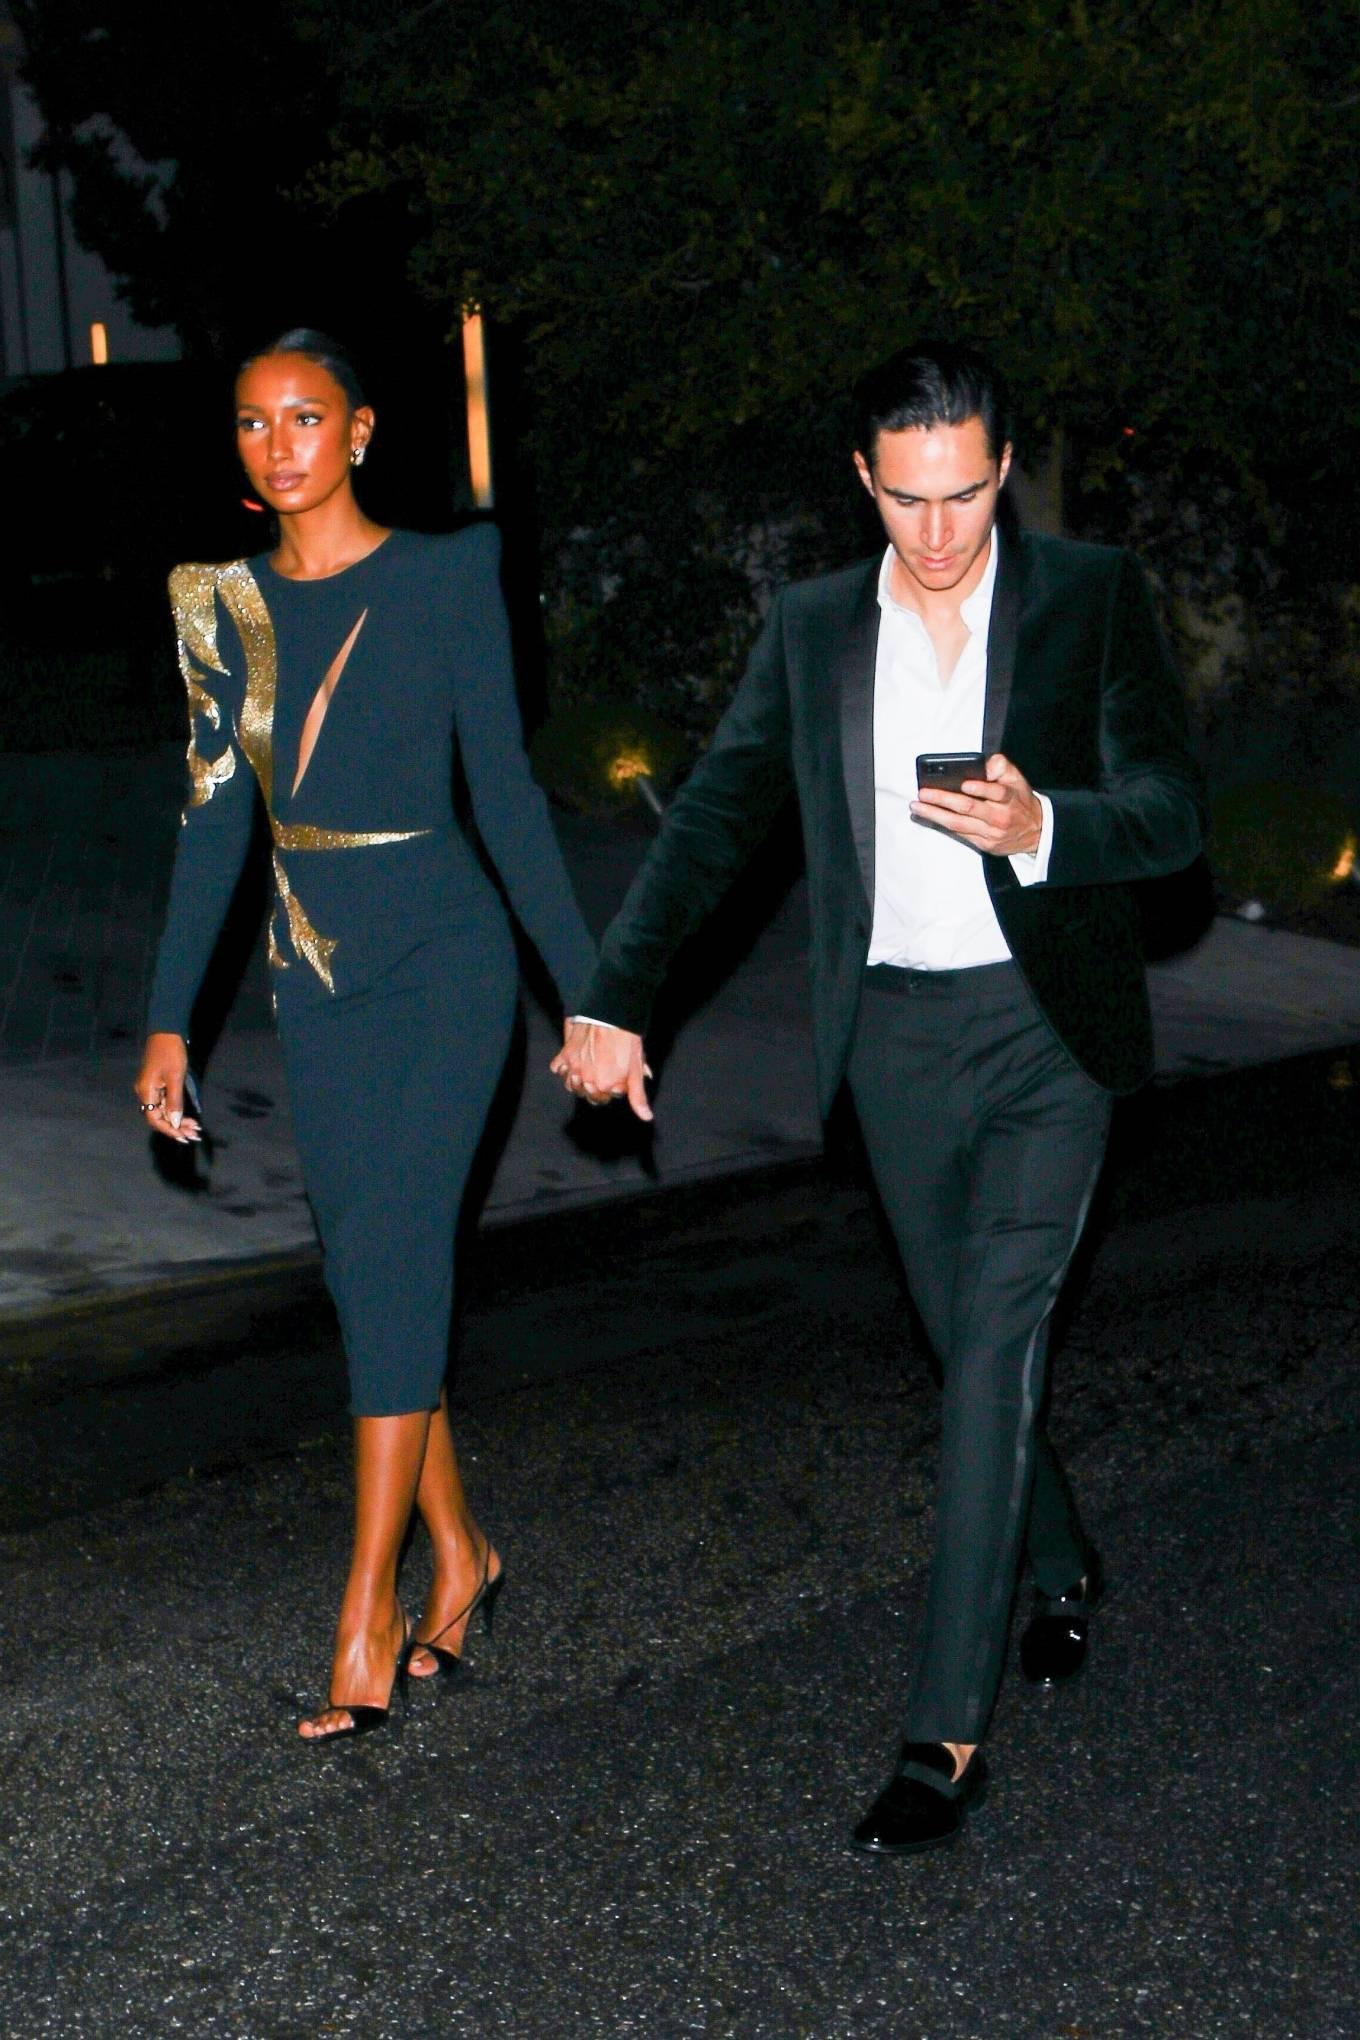 Jasmine Tookes 2021 : Jasmine Tookes – In tight dress leaves an Oscars afterparty with her fiance in Bel Air-10